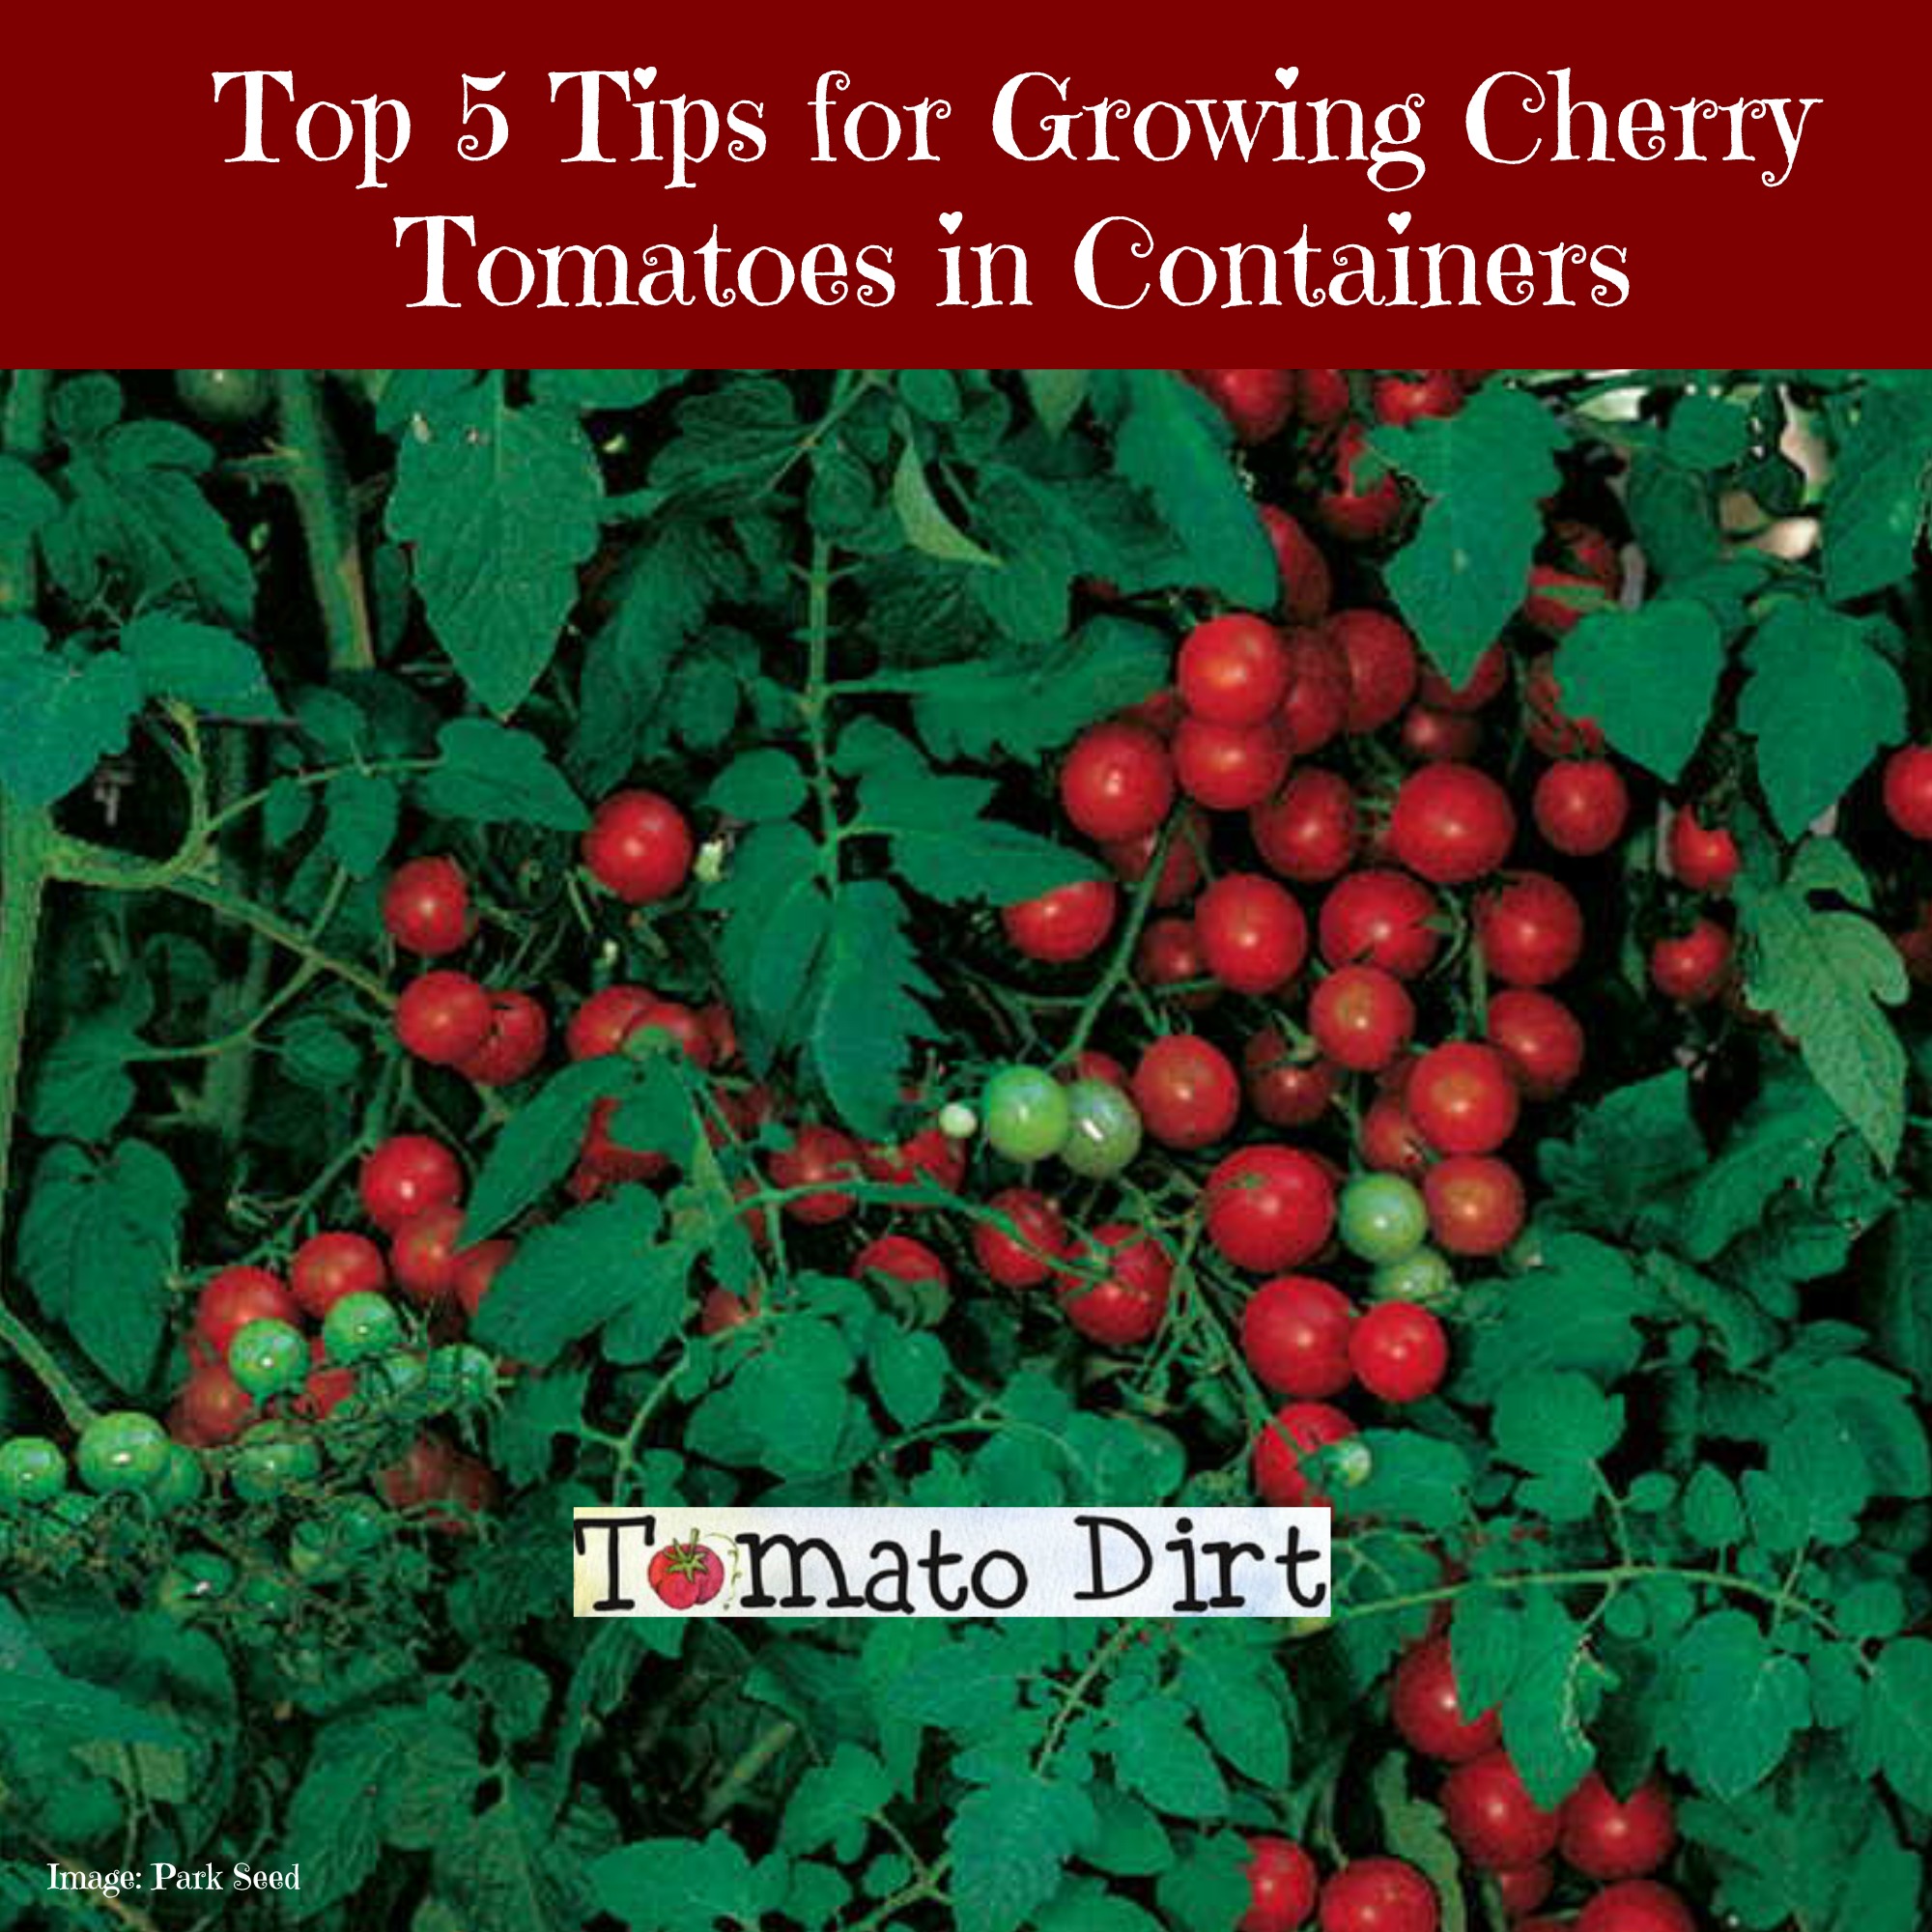 5 Tips for Growing Cherry Tomatoes in Containers